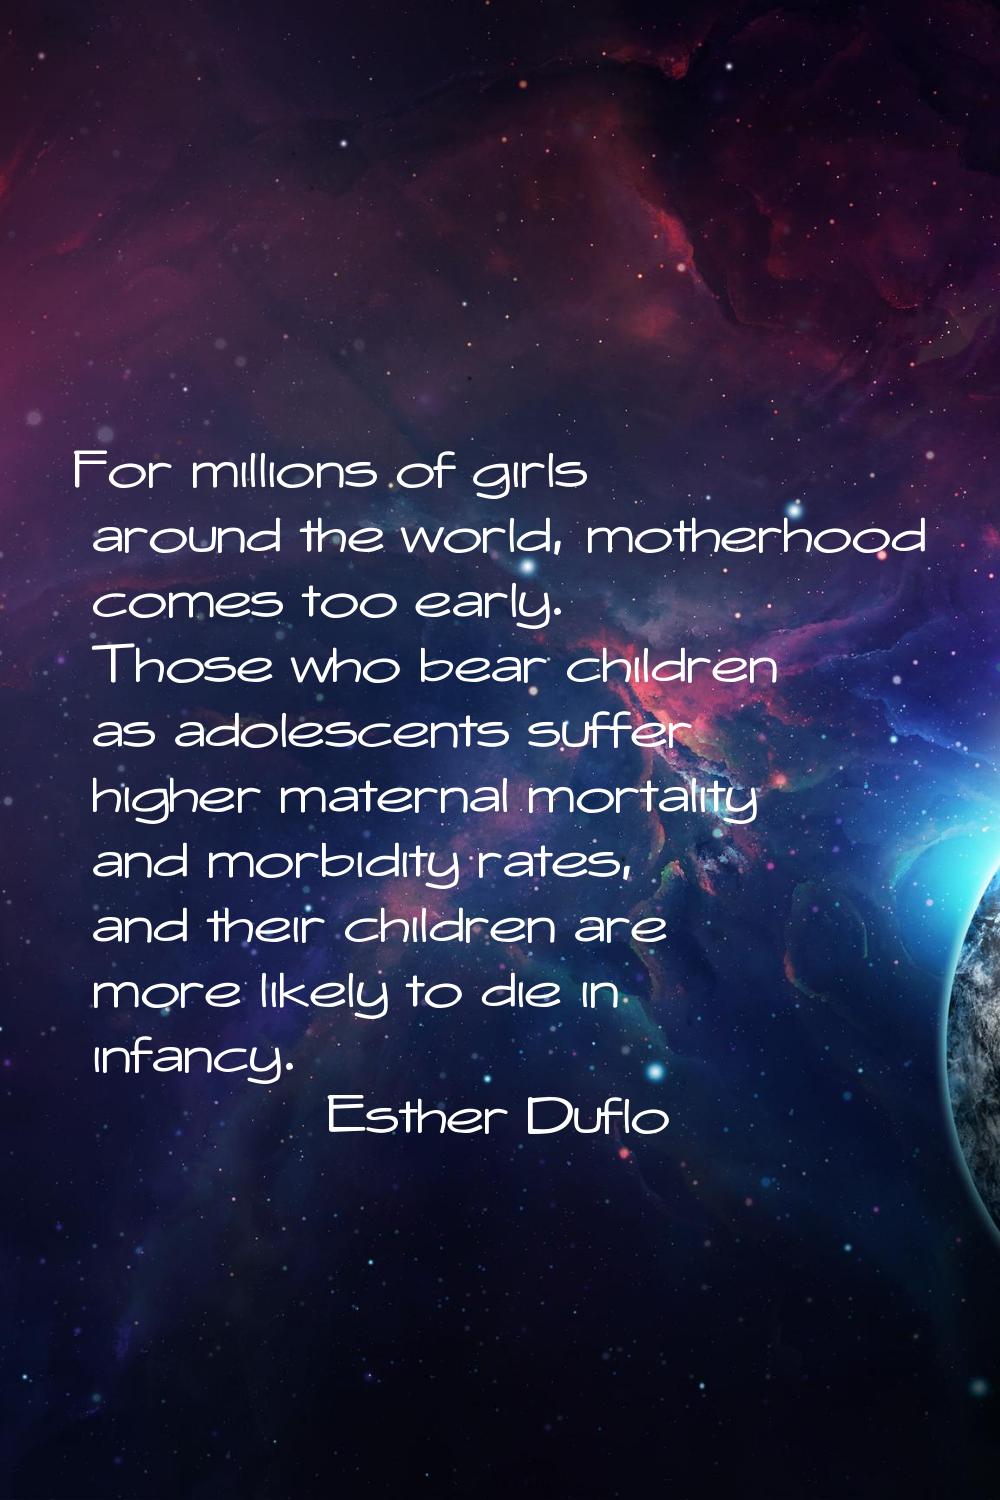 For millions of girls around the world, motherhood comes too early. Those who bear children as adol